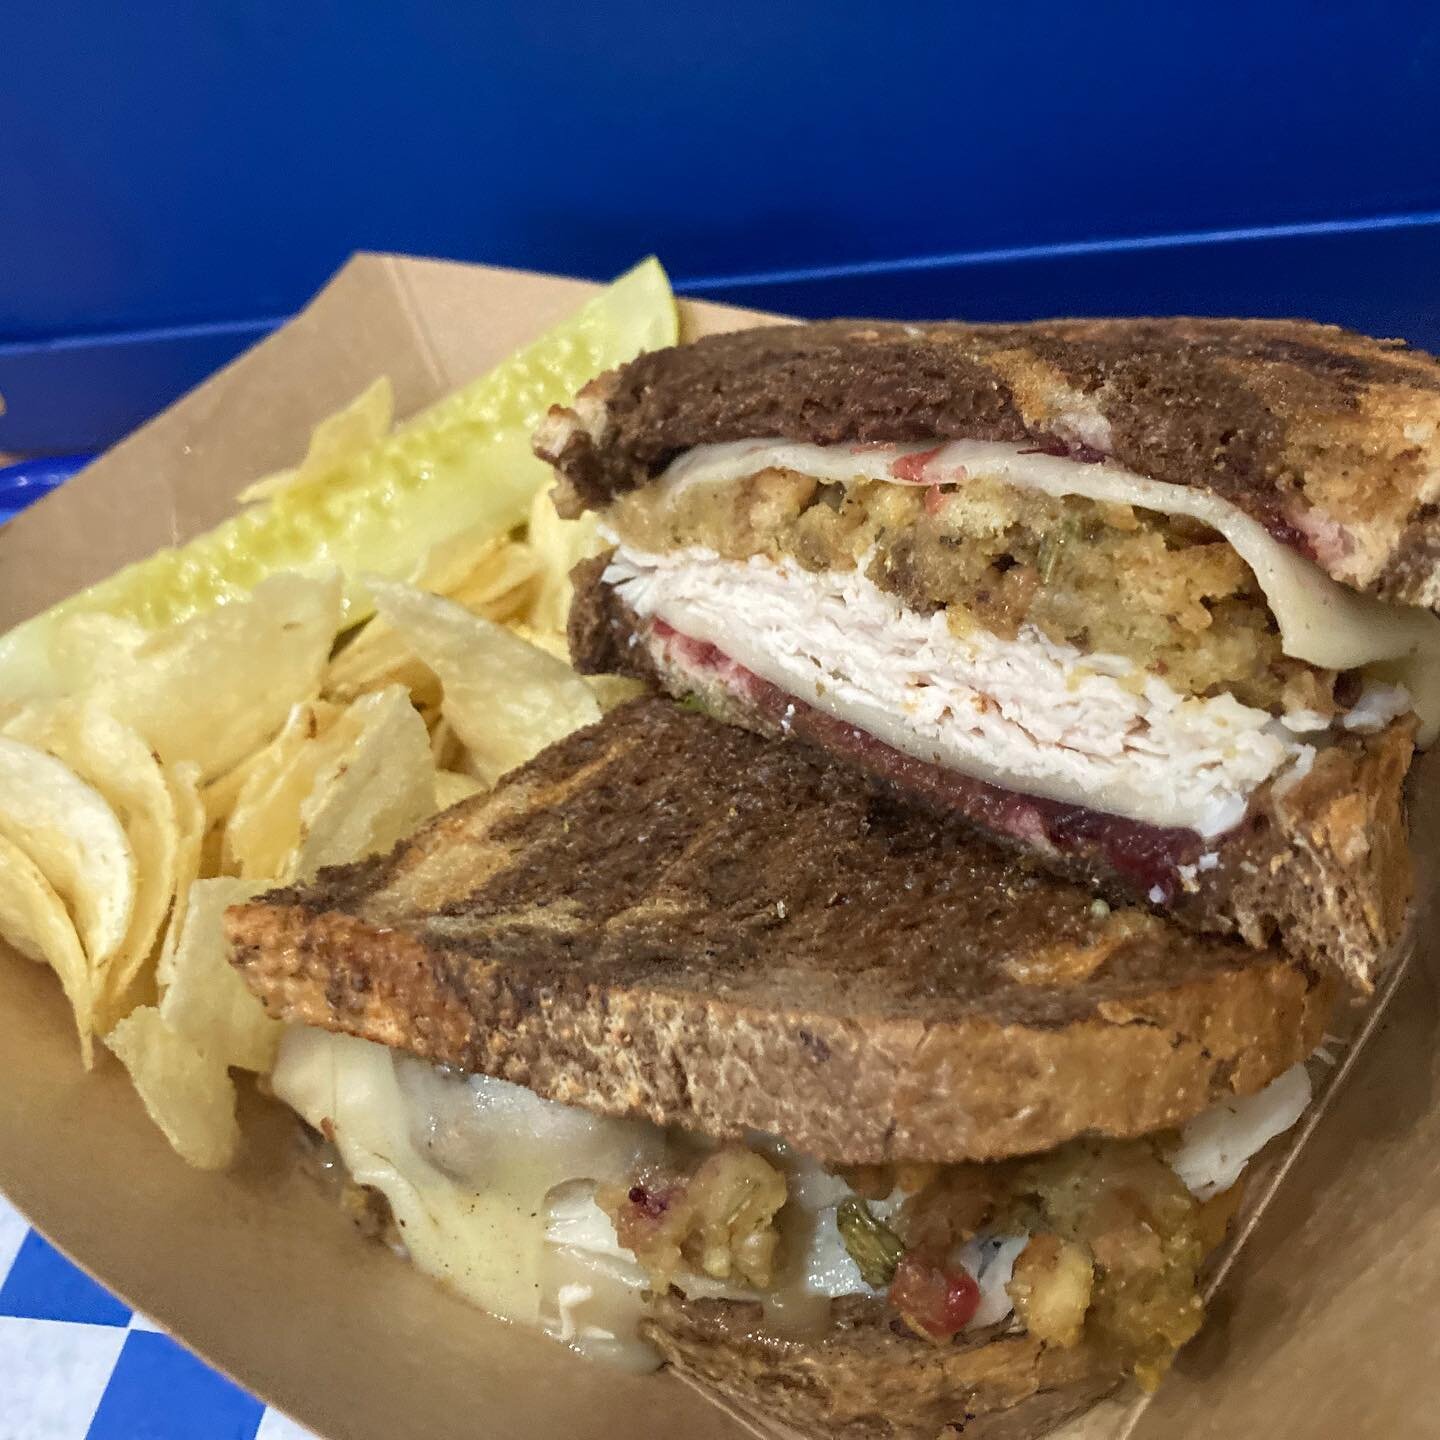 Try our new Thanksgiving Reuben:
Grilled Marble Rye with Turkey, Swiss, Cranberry Sauce, and Gravy. 

Only available 11/1 - 11/22